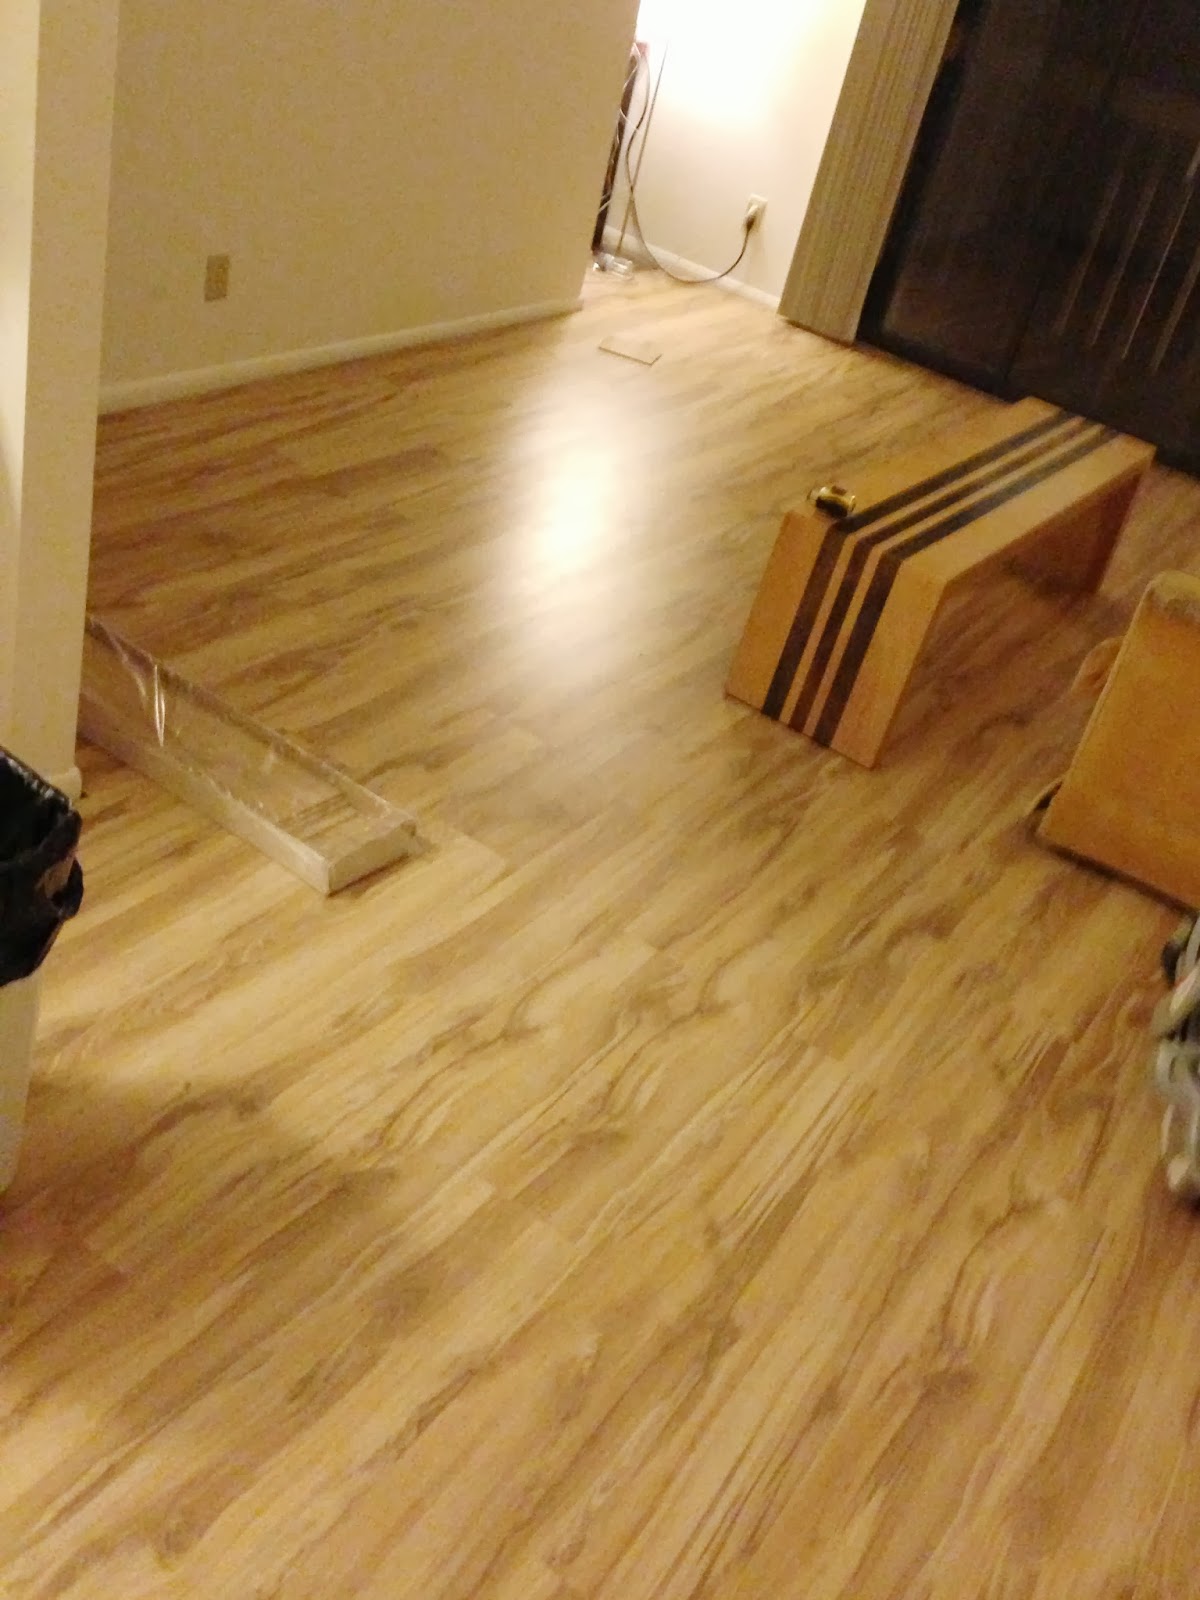 How We Put Hardwood Over Carpet Messymom, Can I Install Laminate Flooring On Top Of Carpet